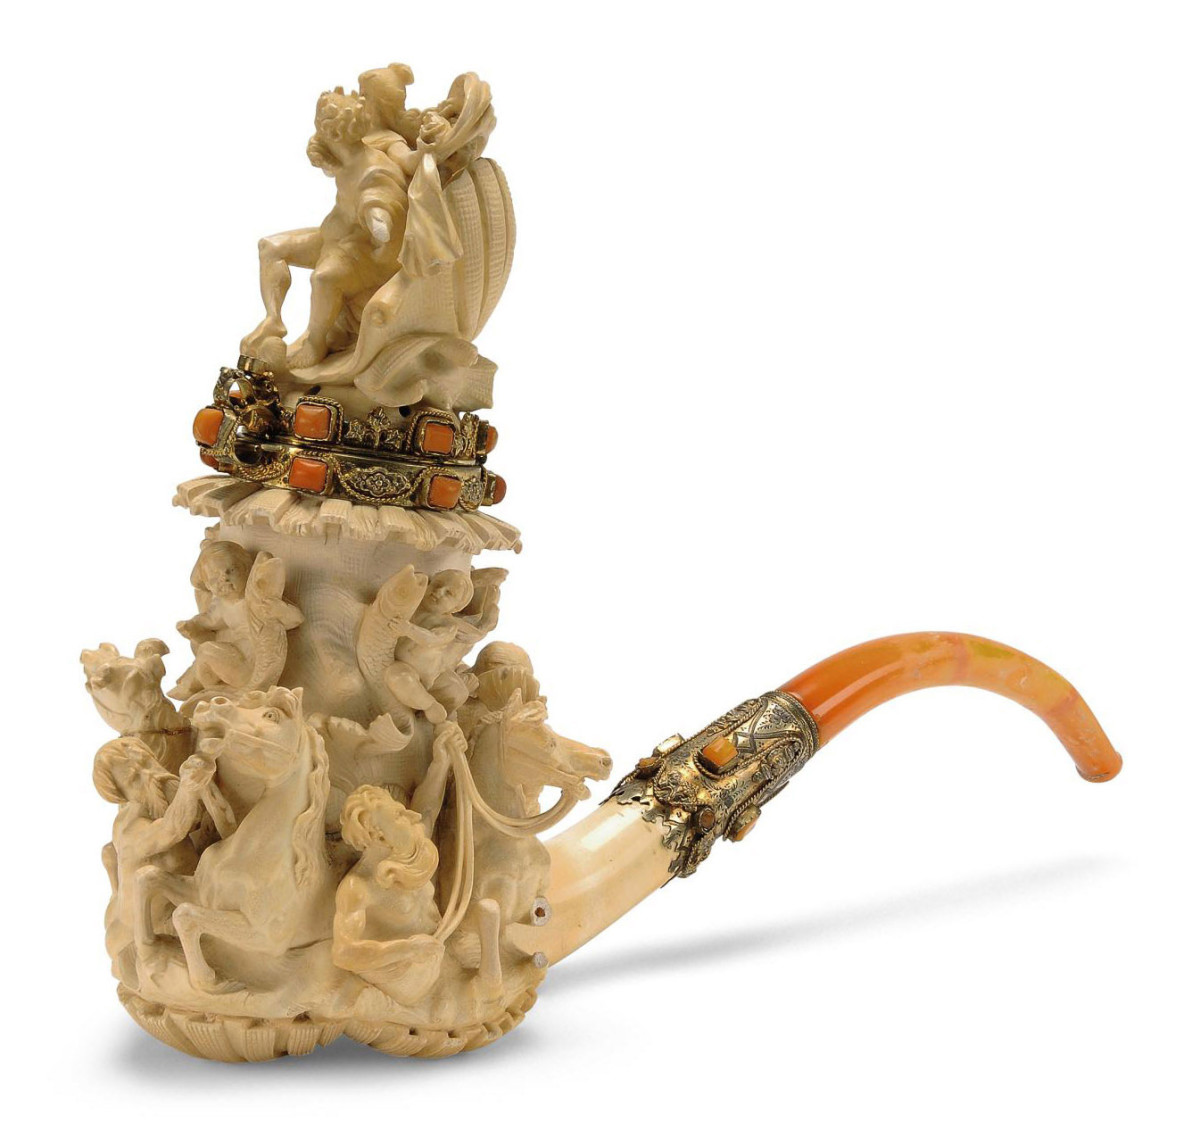 Majestic meerschaum pipe carved with the figure of Poseidon, nereids and sea horses, accented with coral beads and amber mouthpiece, Austria, c. 1875; 8-1/2” h. From the Trevor Barton Collection, this sold at Christie’s in 2010 for $13,000.